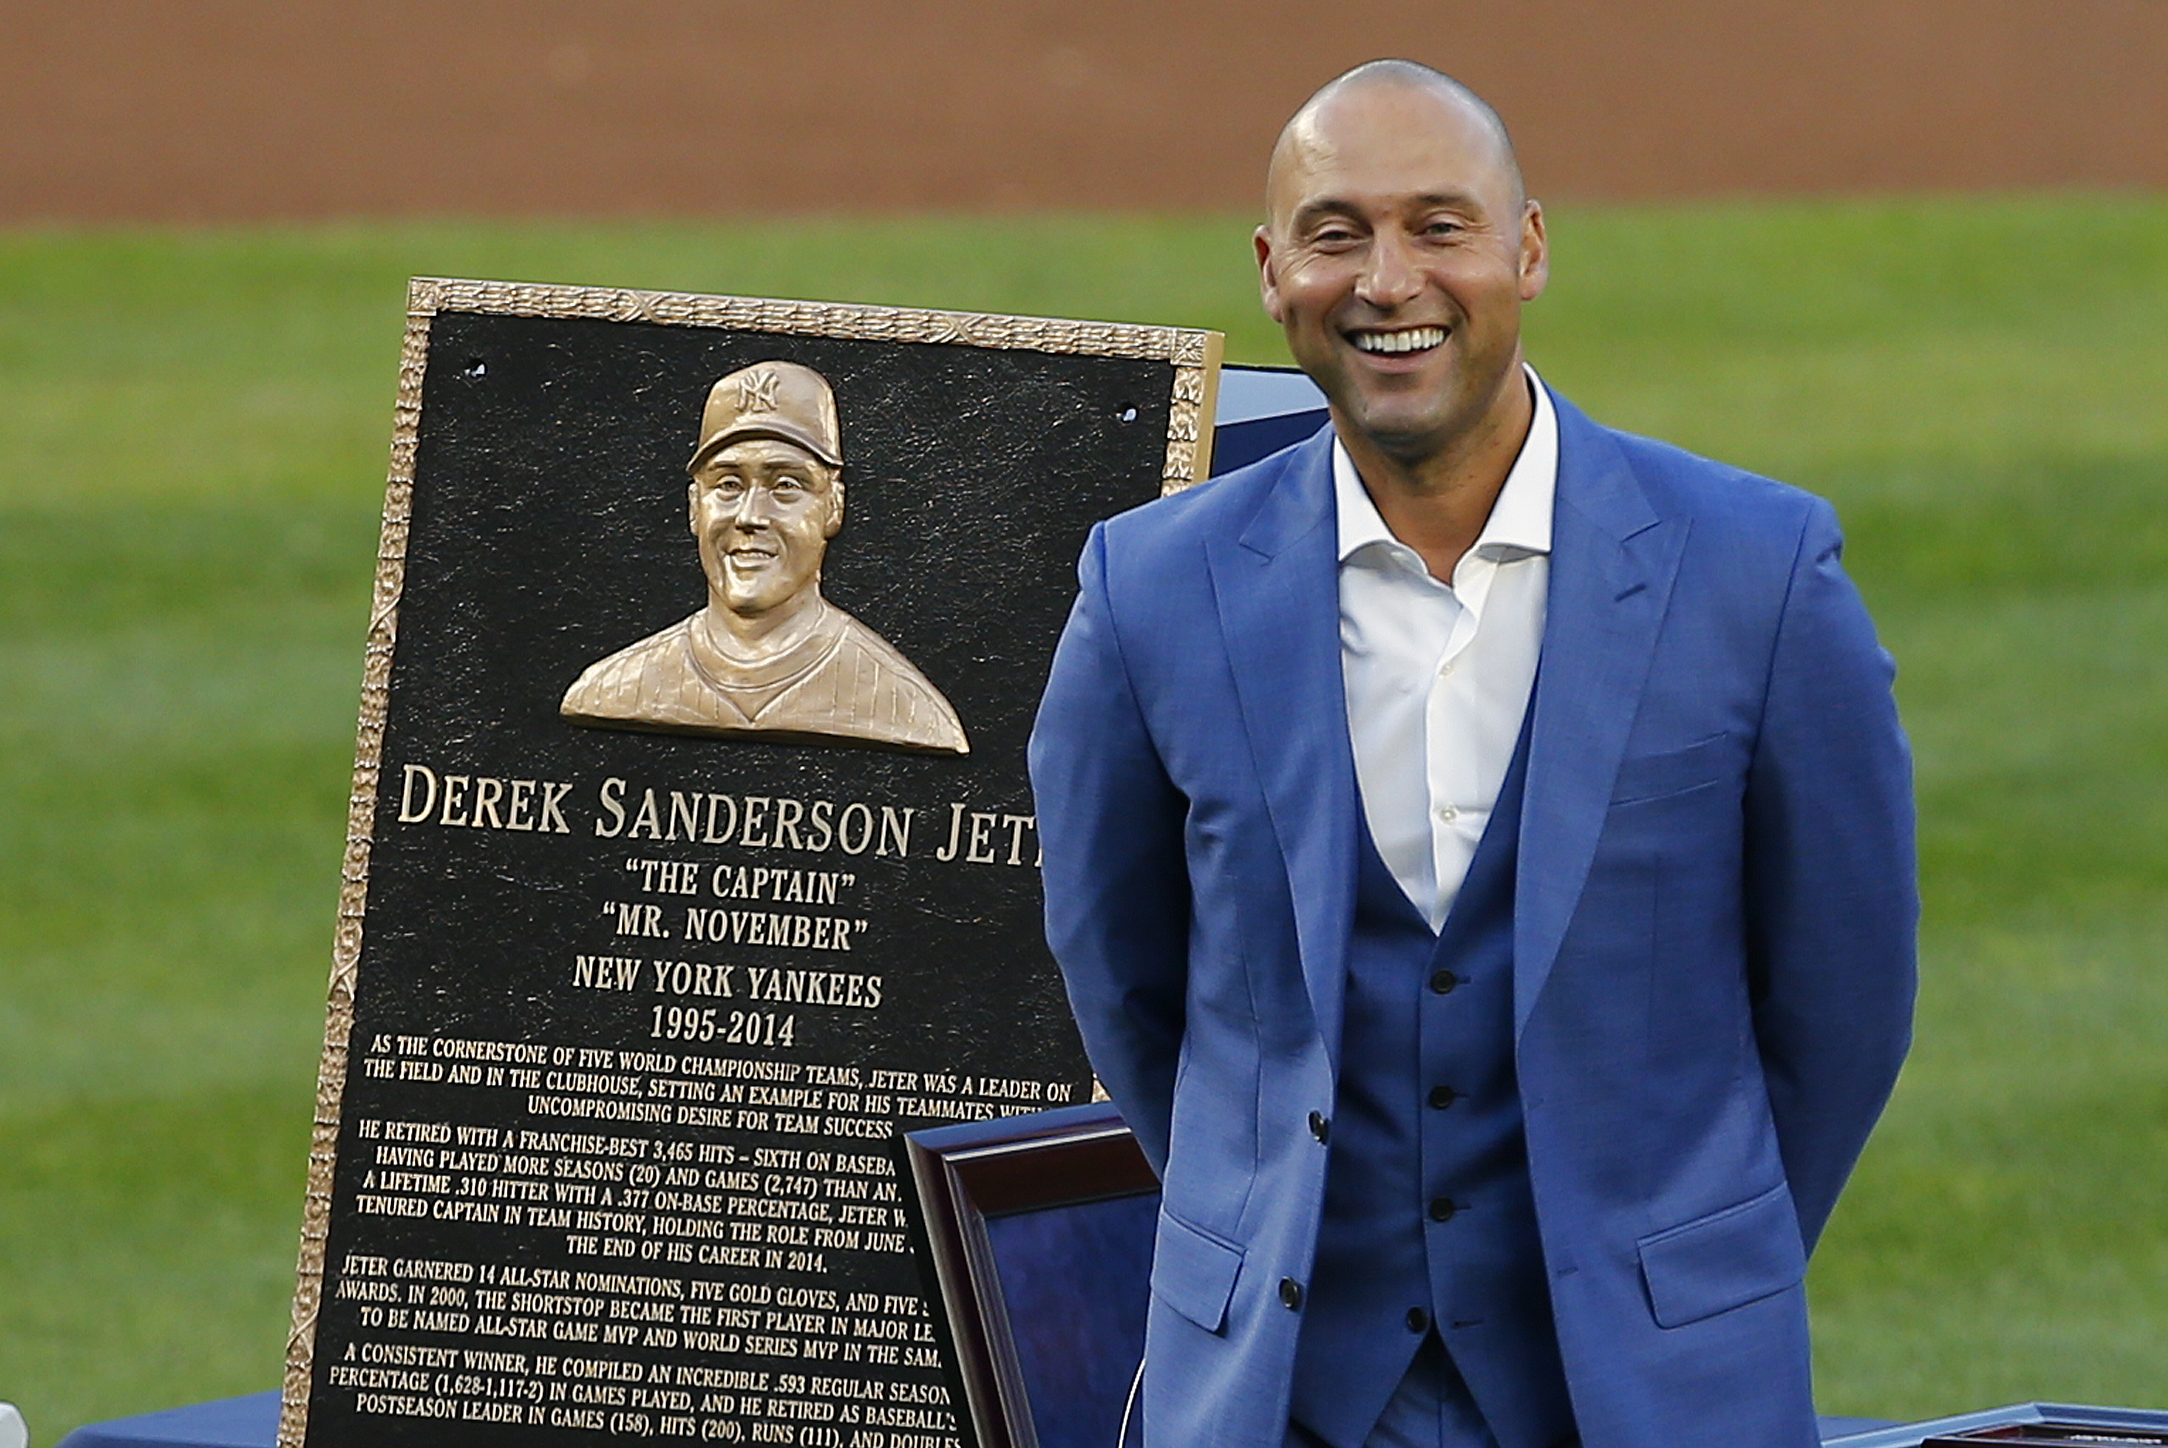 Stories of Derek Jeter's Greatness from All Corners of Captain